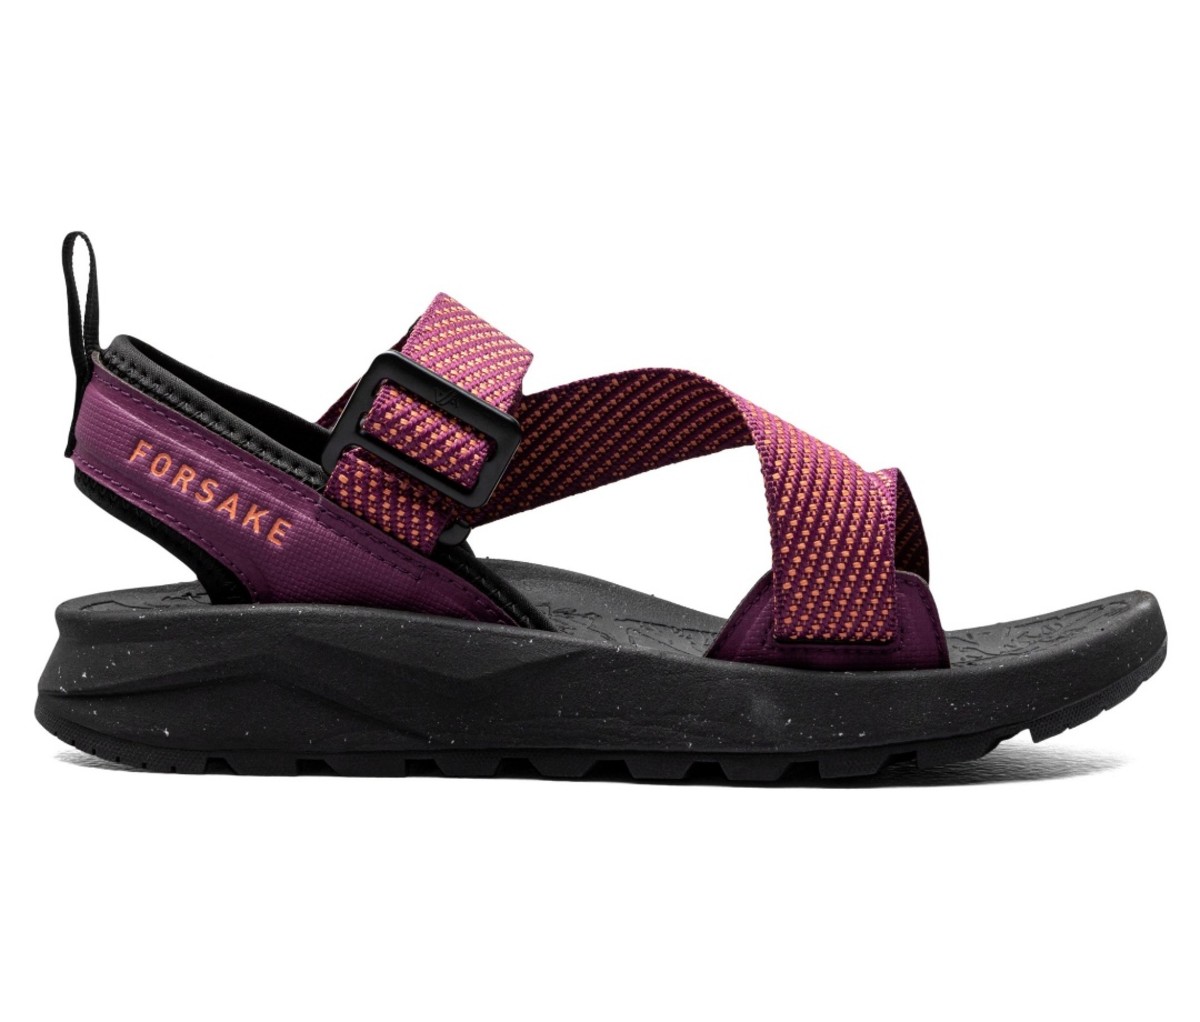 Huaraches Sandals: First 3 Miles in Barefoot Running Sandals - FixWillpower